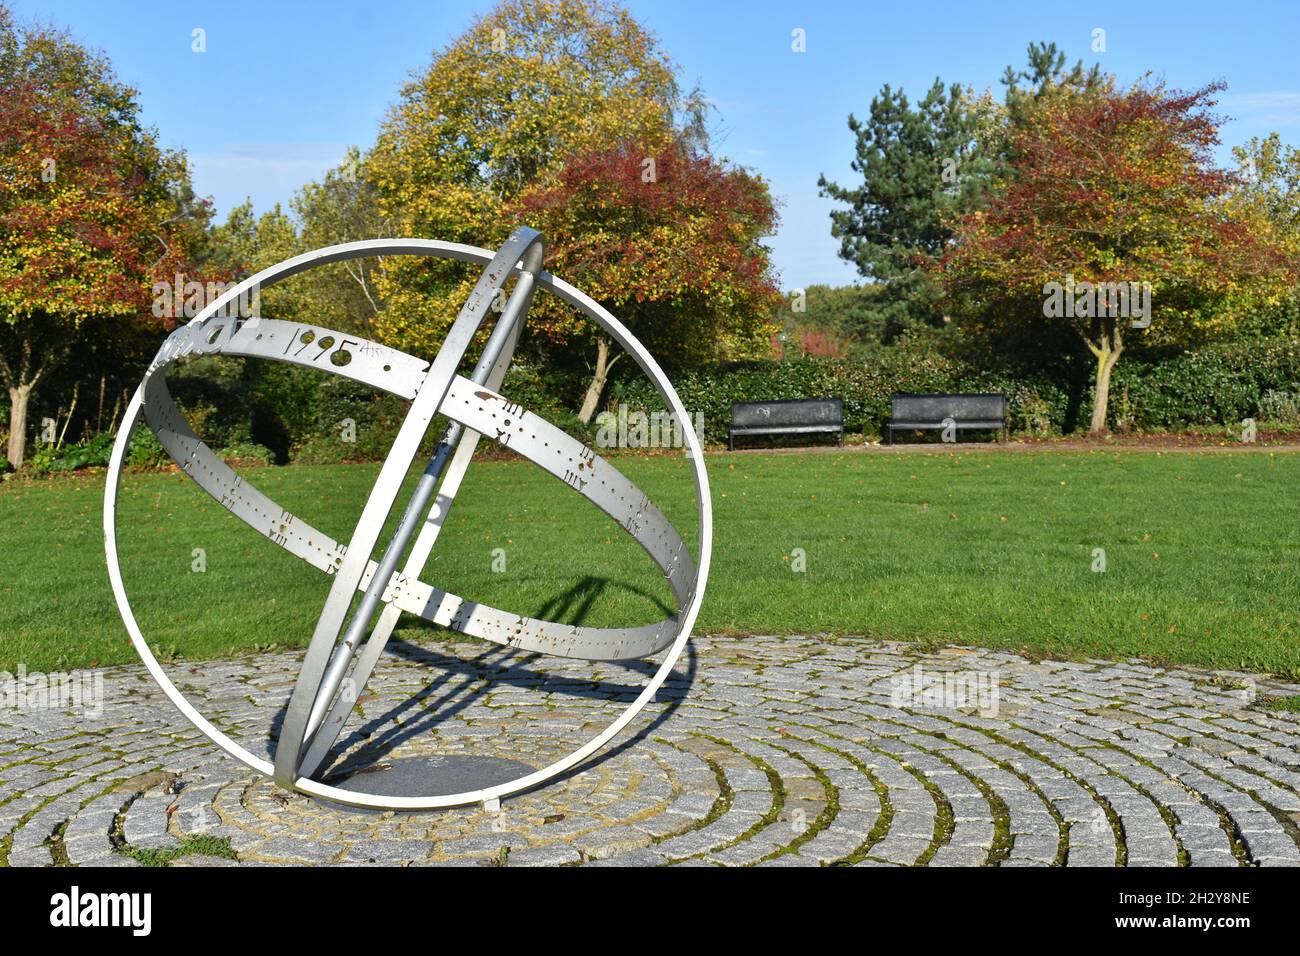 The 'Armillary Sphere' a sundial by Justin Tunley in Campbell Park, Milton Keynes, which celebrates the tenth anniversary of MK Housing Association. Stock Photo